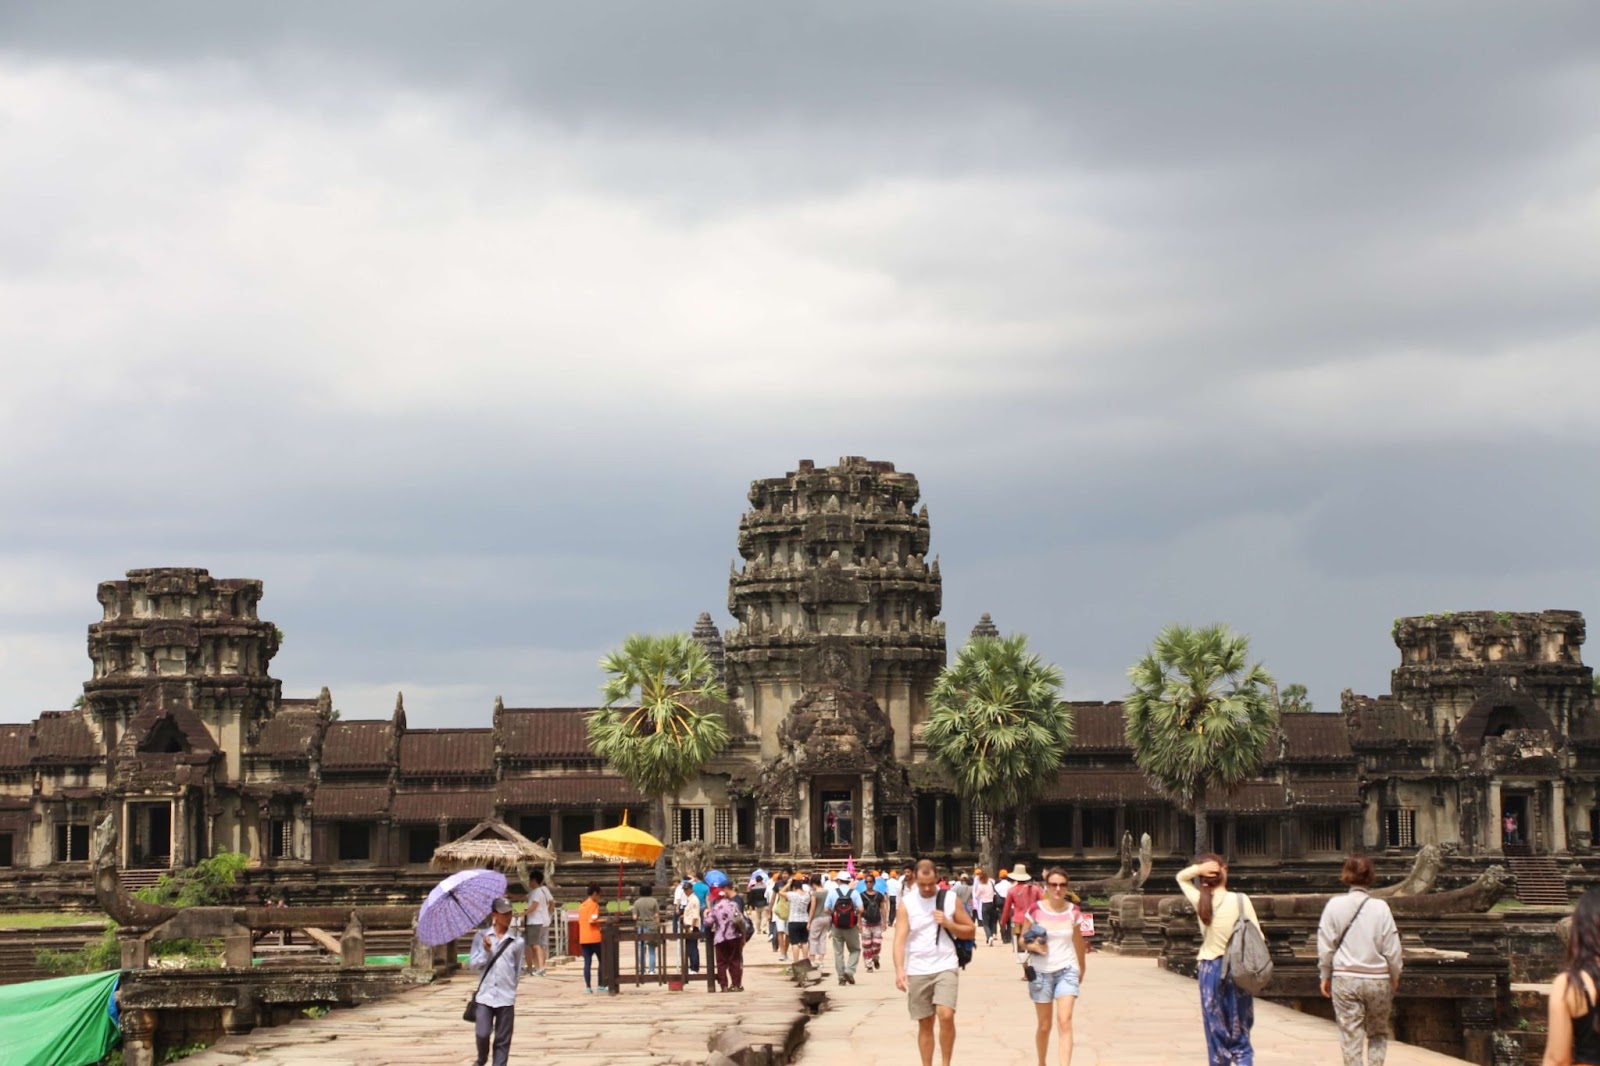 3 days in Siem Reap. This was the walkway we walked towards Angkor Wat. This is the Western Gopura entrance to Angkor Wat.